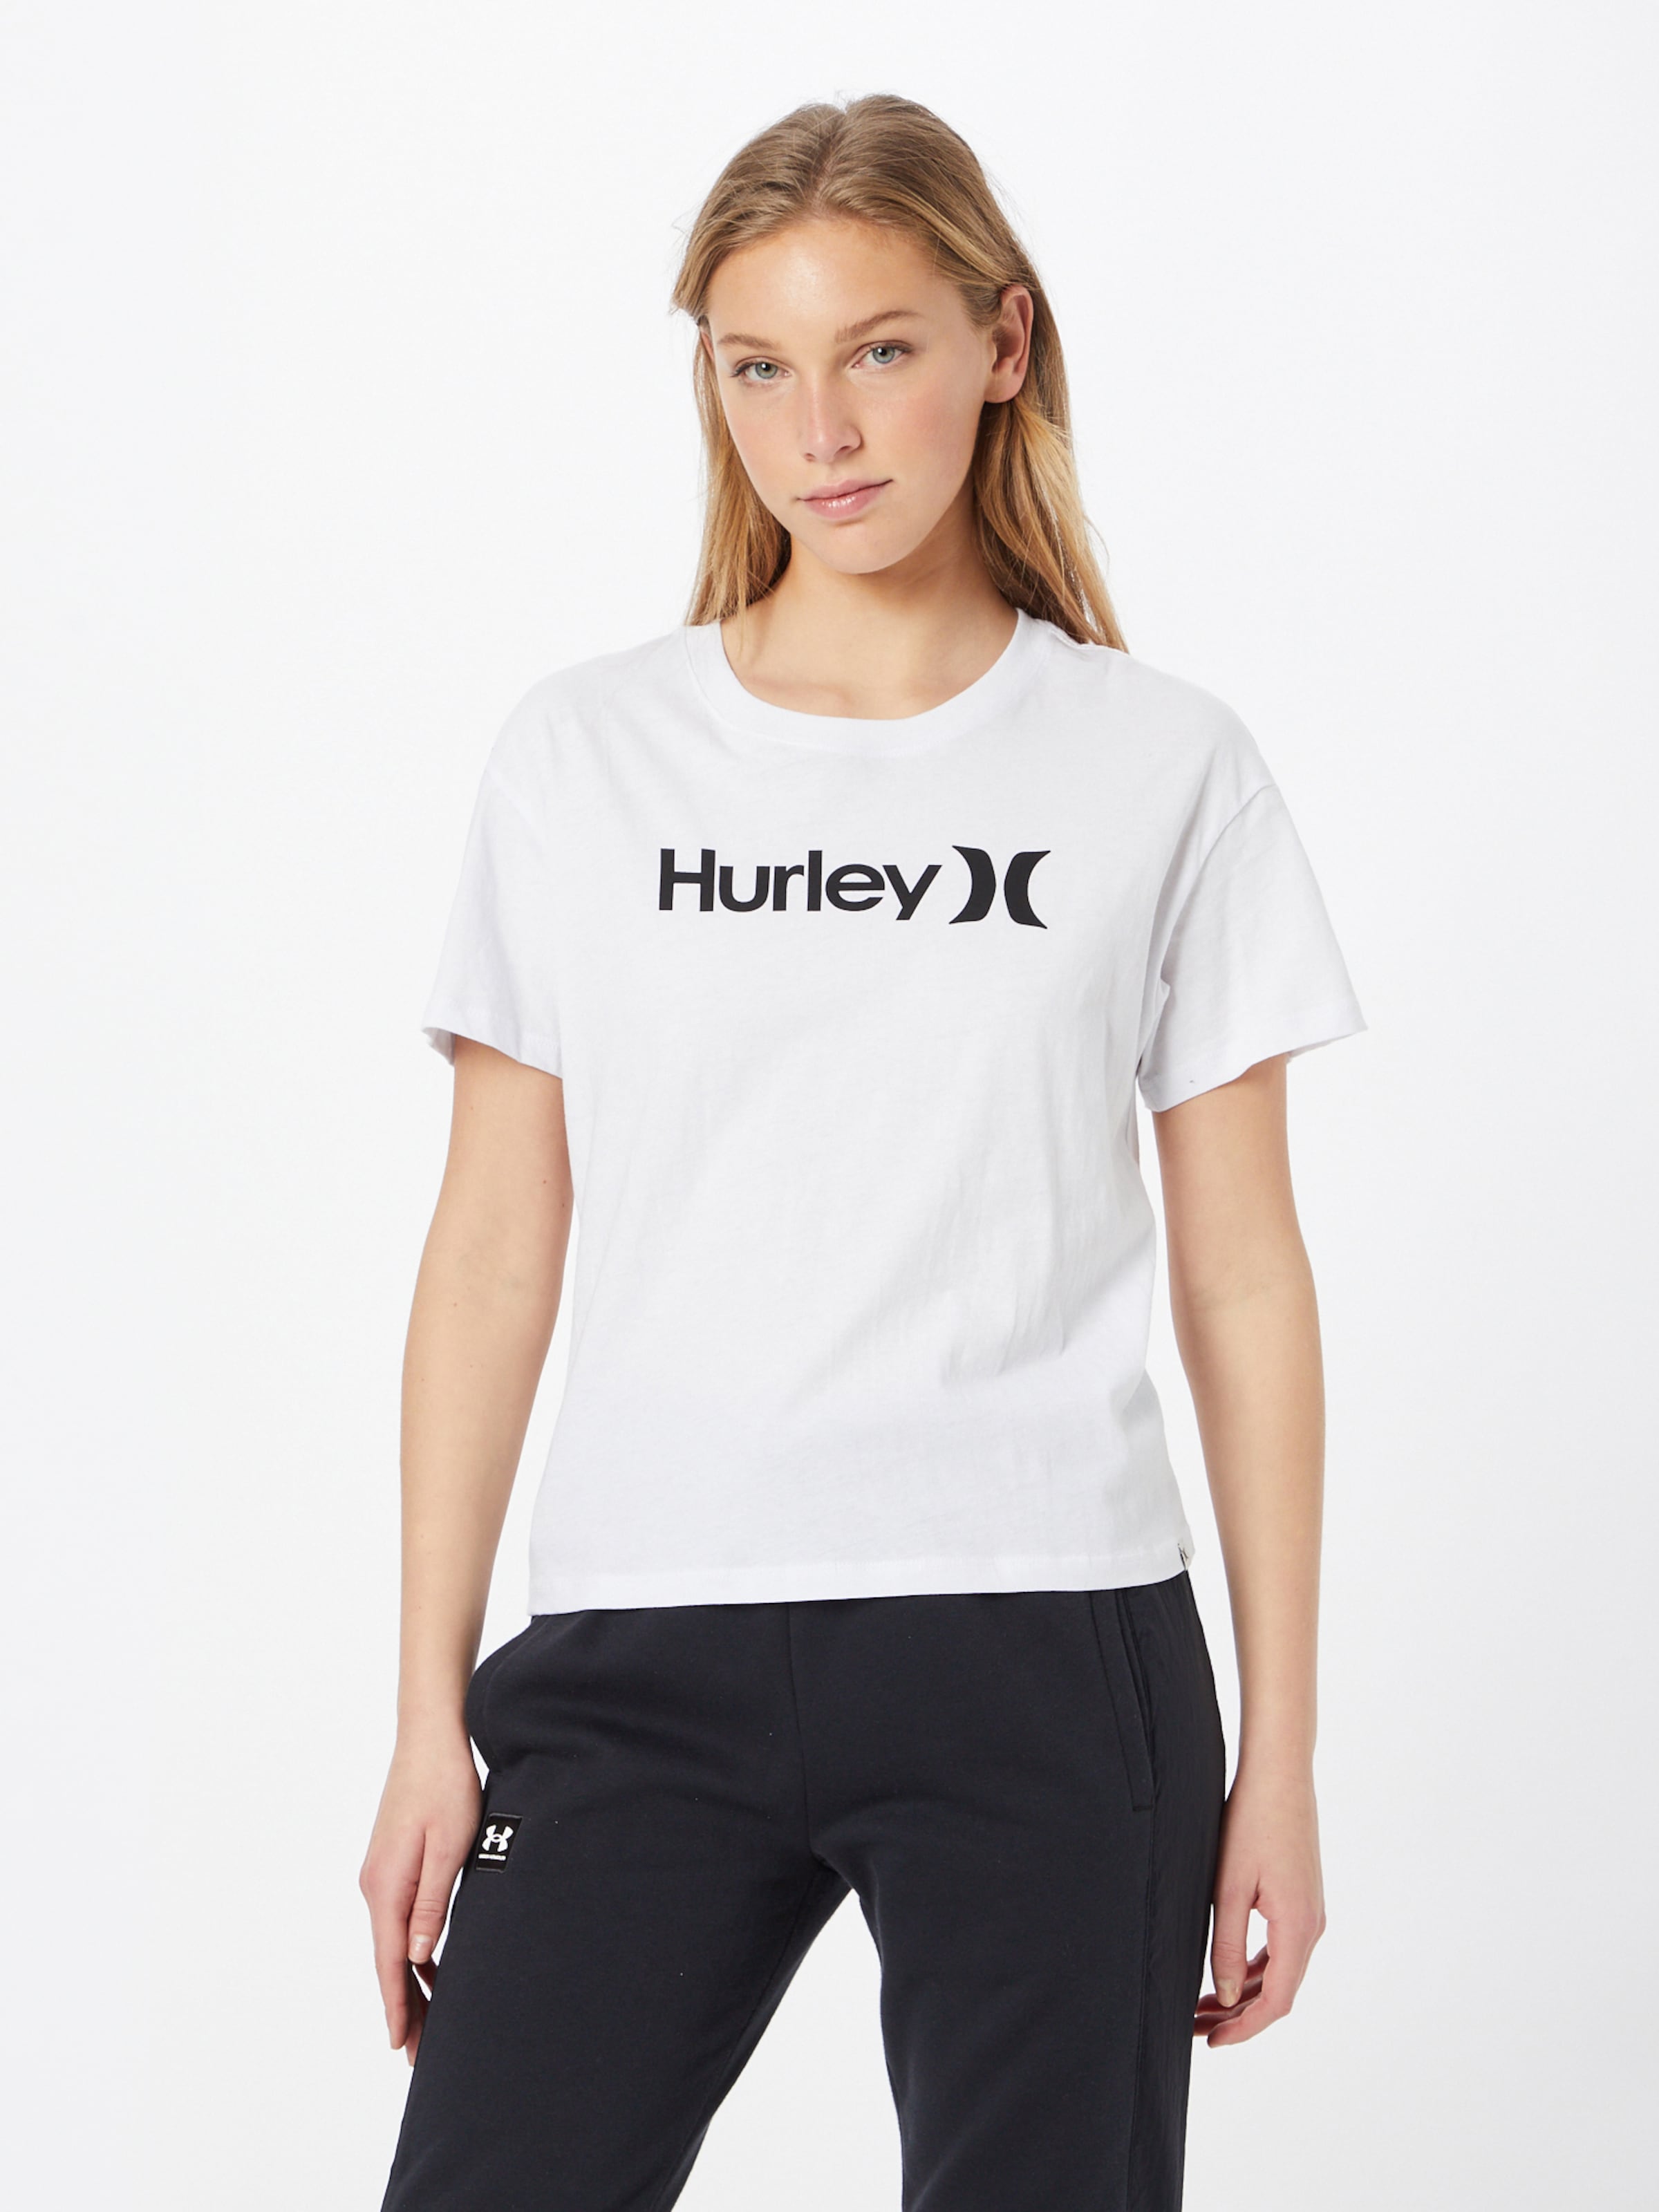 Hurley Ropa deportiva para mujeres | Comprar | ABOUT YOU